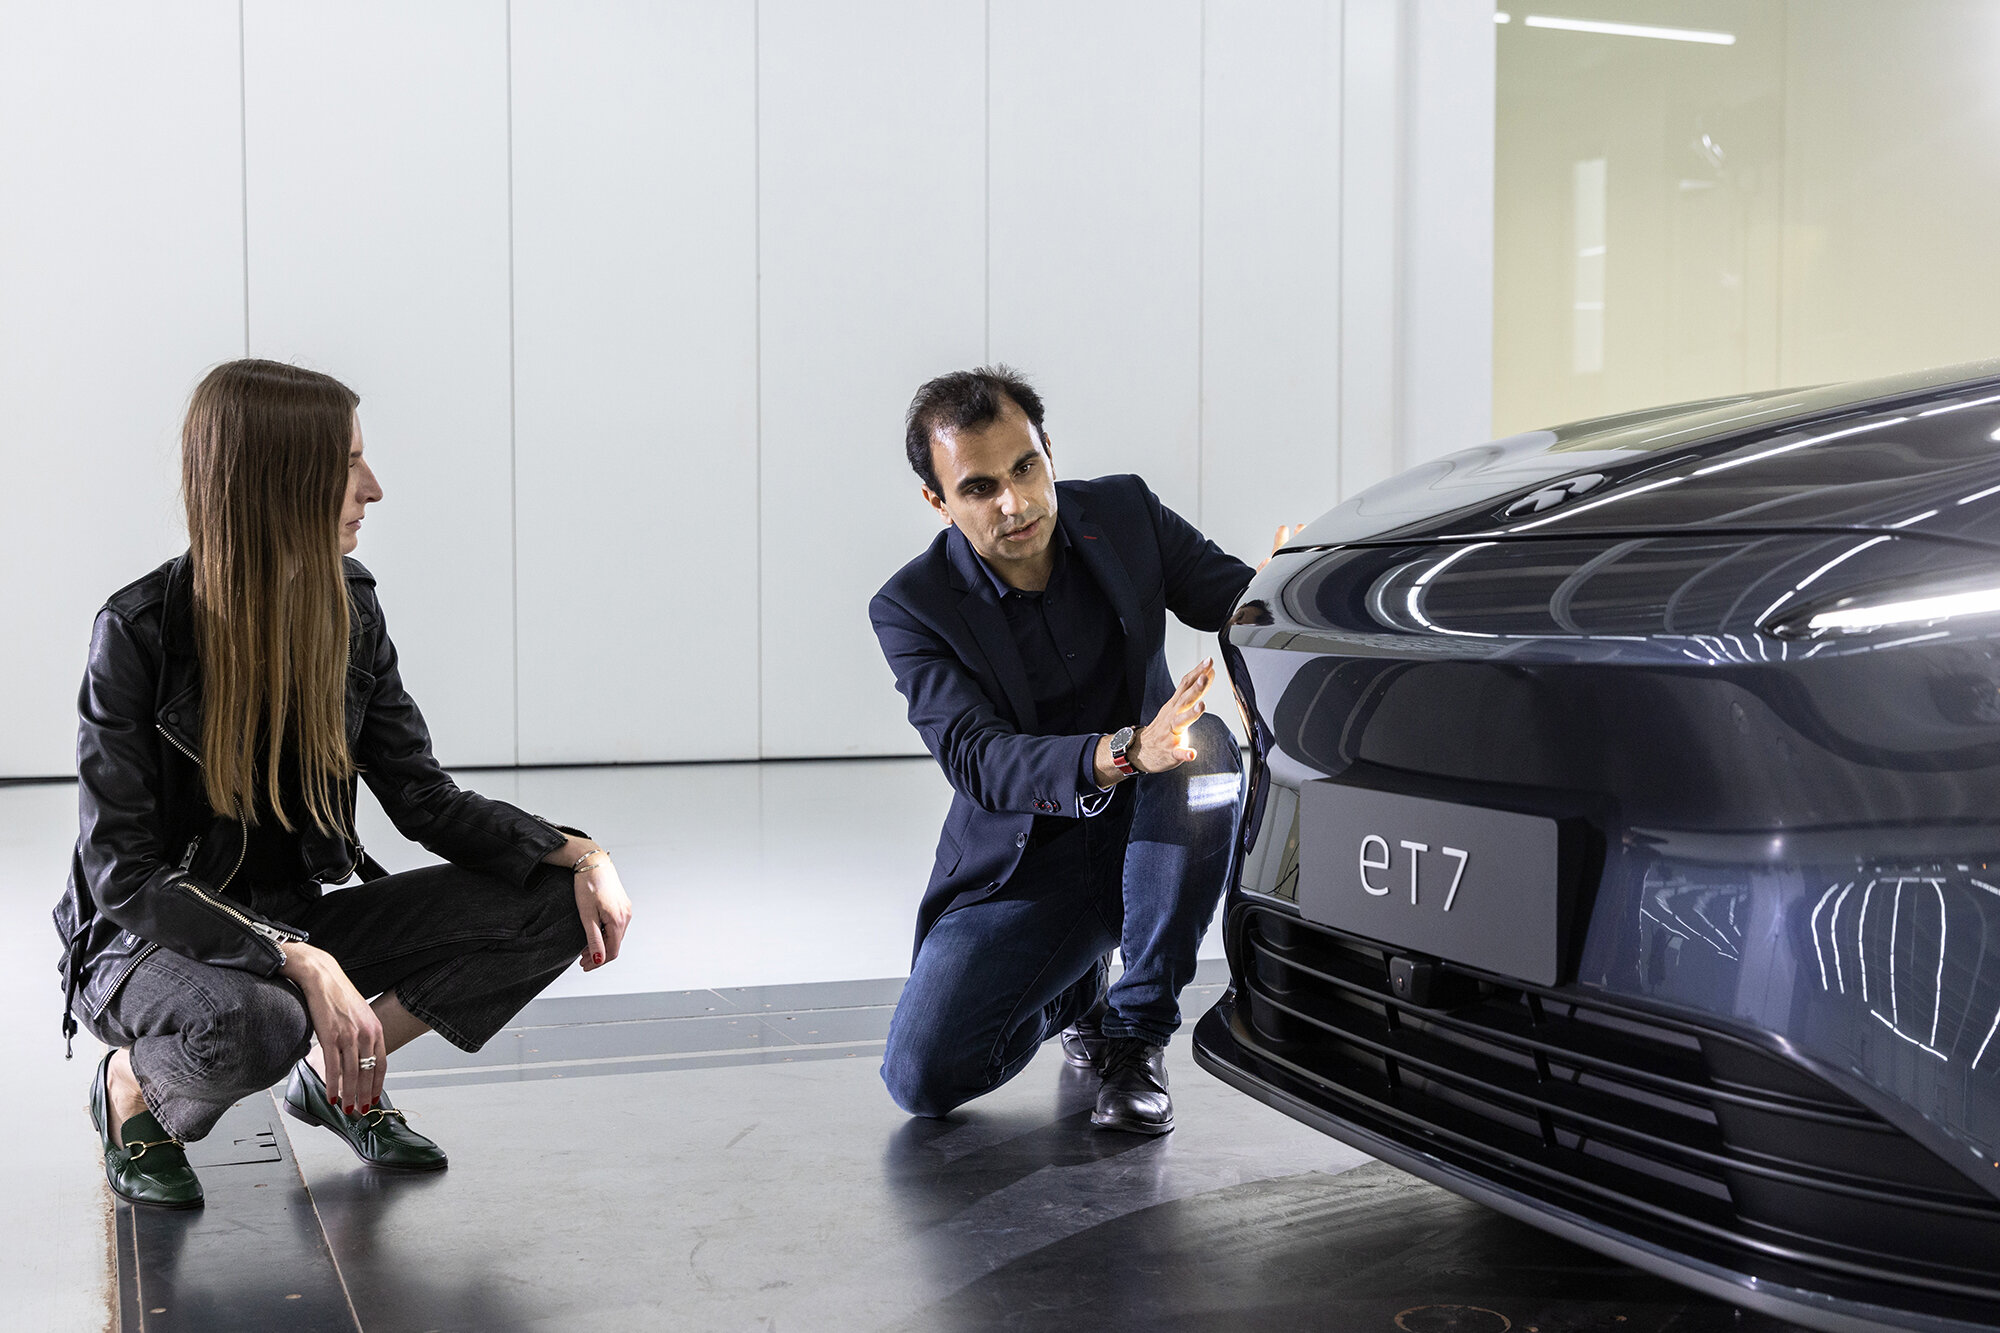 Founder of ellectric, Britta Reineke with NIO's Exterior Designer Ahmad Moslemifar talking about the front of the ET7